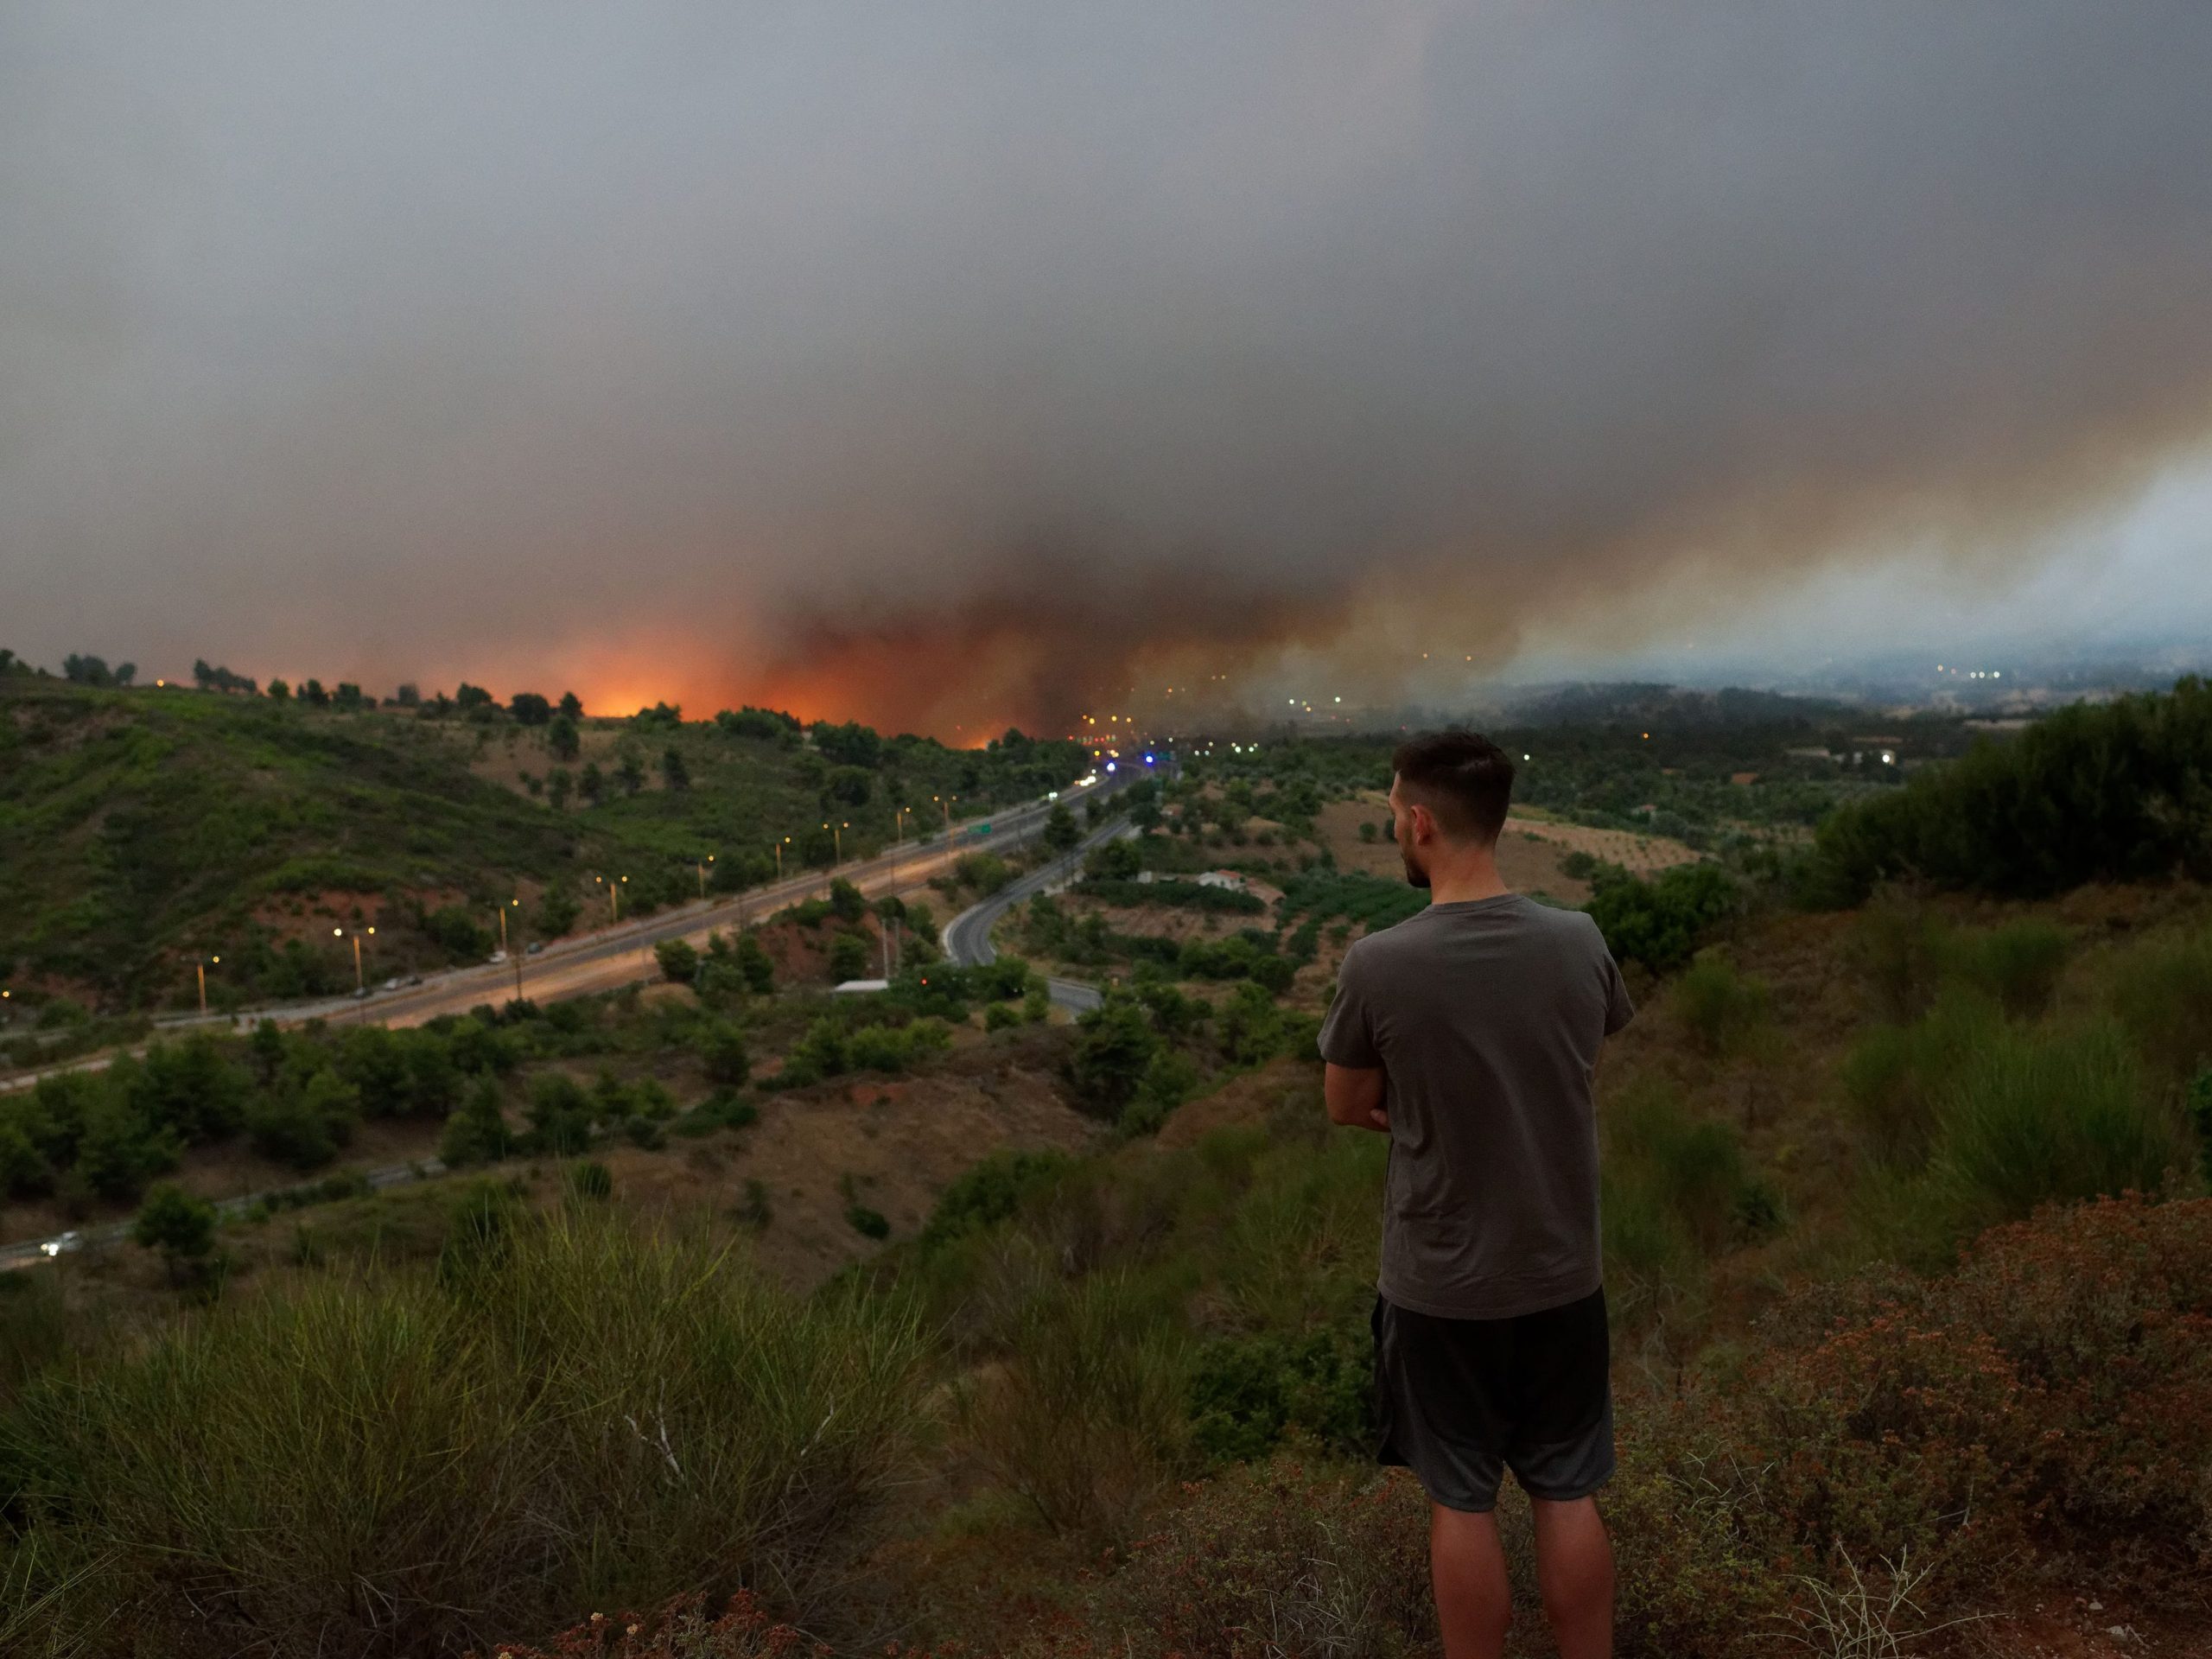 Residential areas in Athens northern suburbs were evacuated after wildfires reached the outskirts of the city as Greece is suffering its worst heatwave in decades